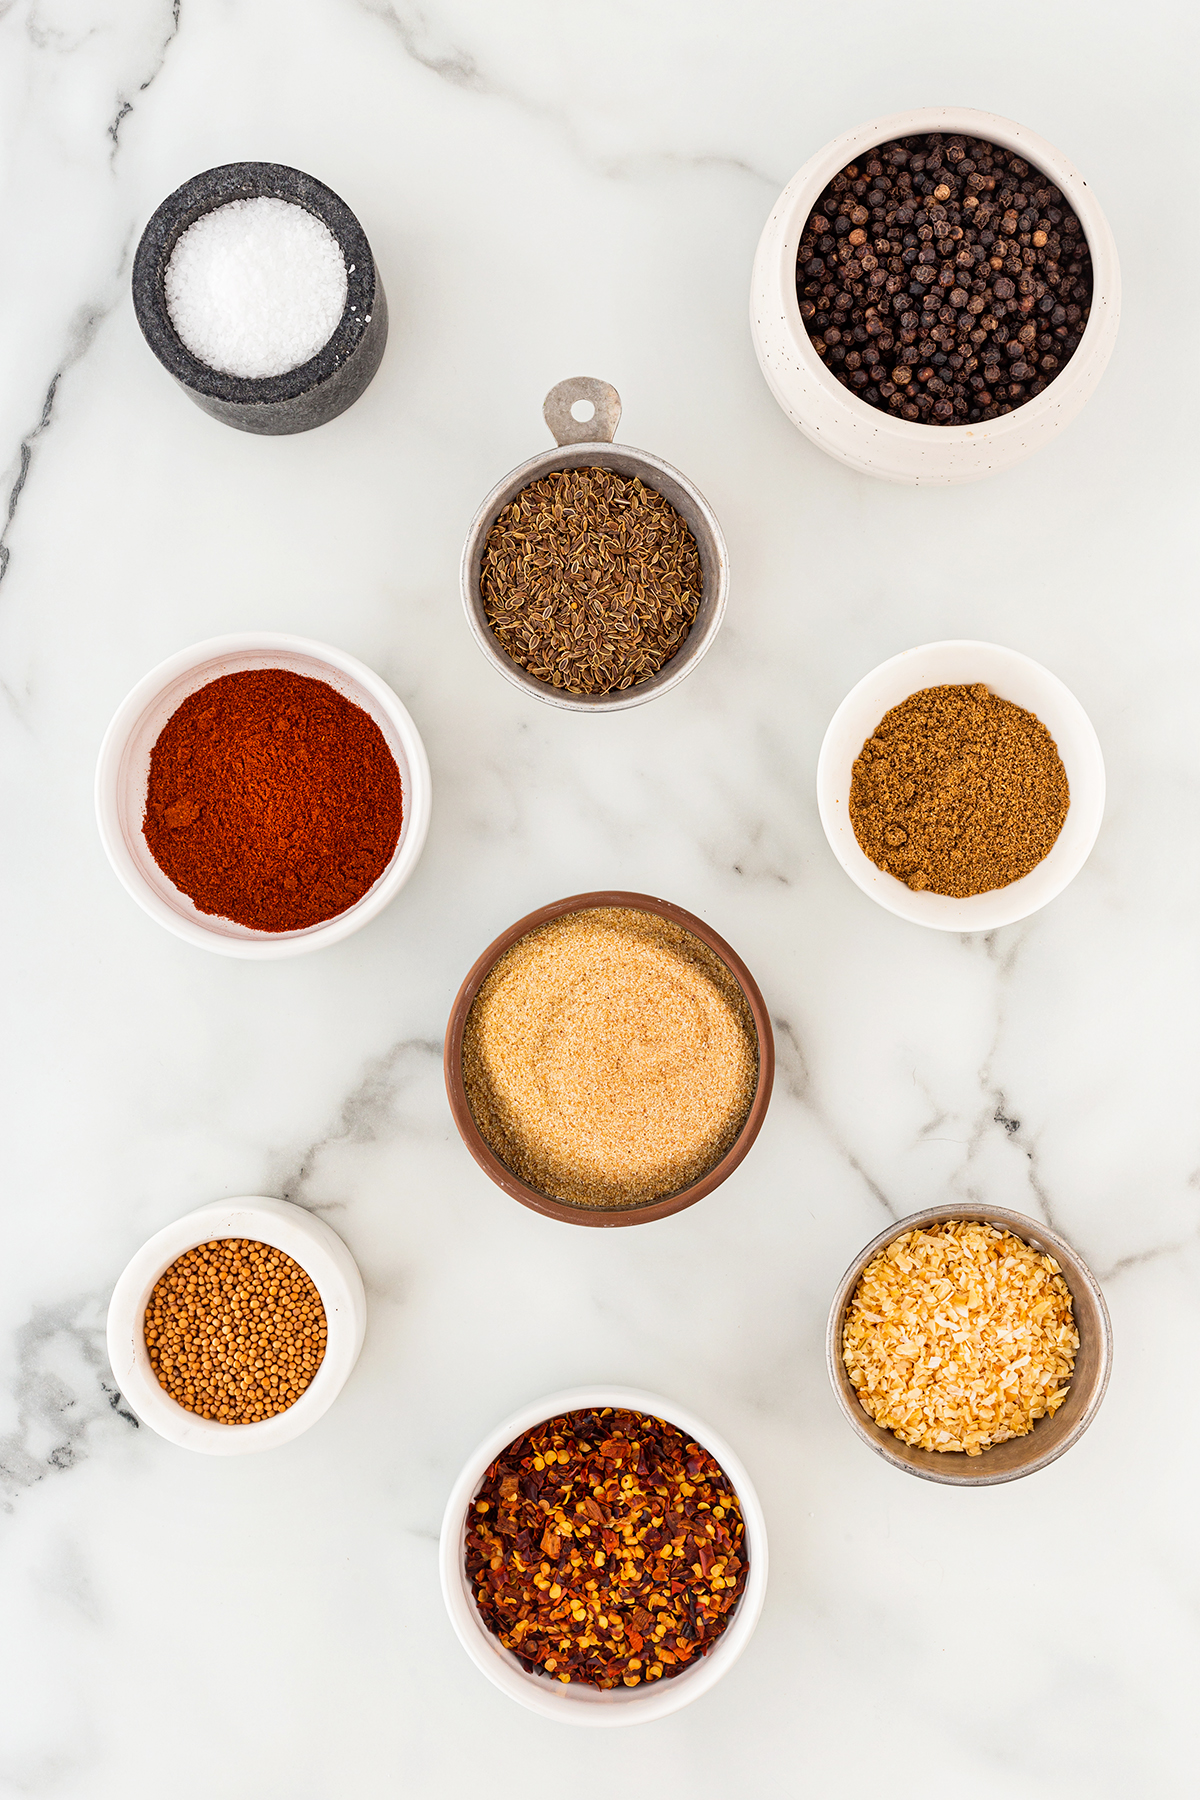 All the ingredients to make Montreal Steak Seasoning in small bowls on a marble countertop.